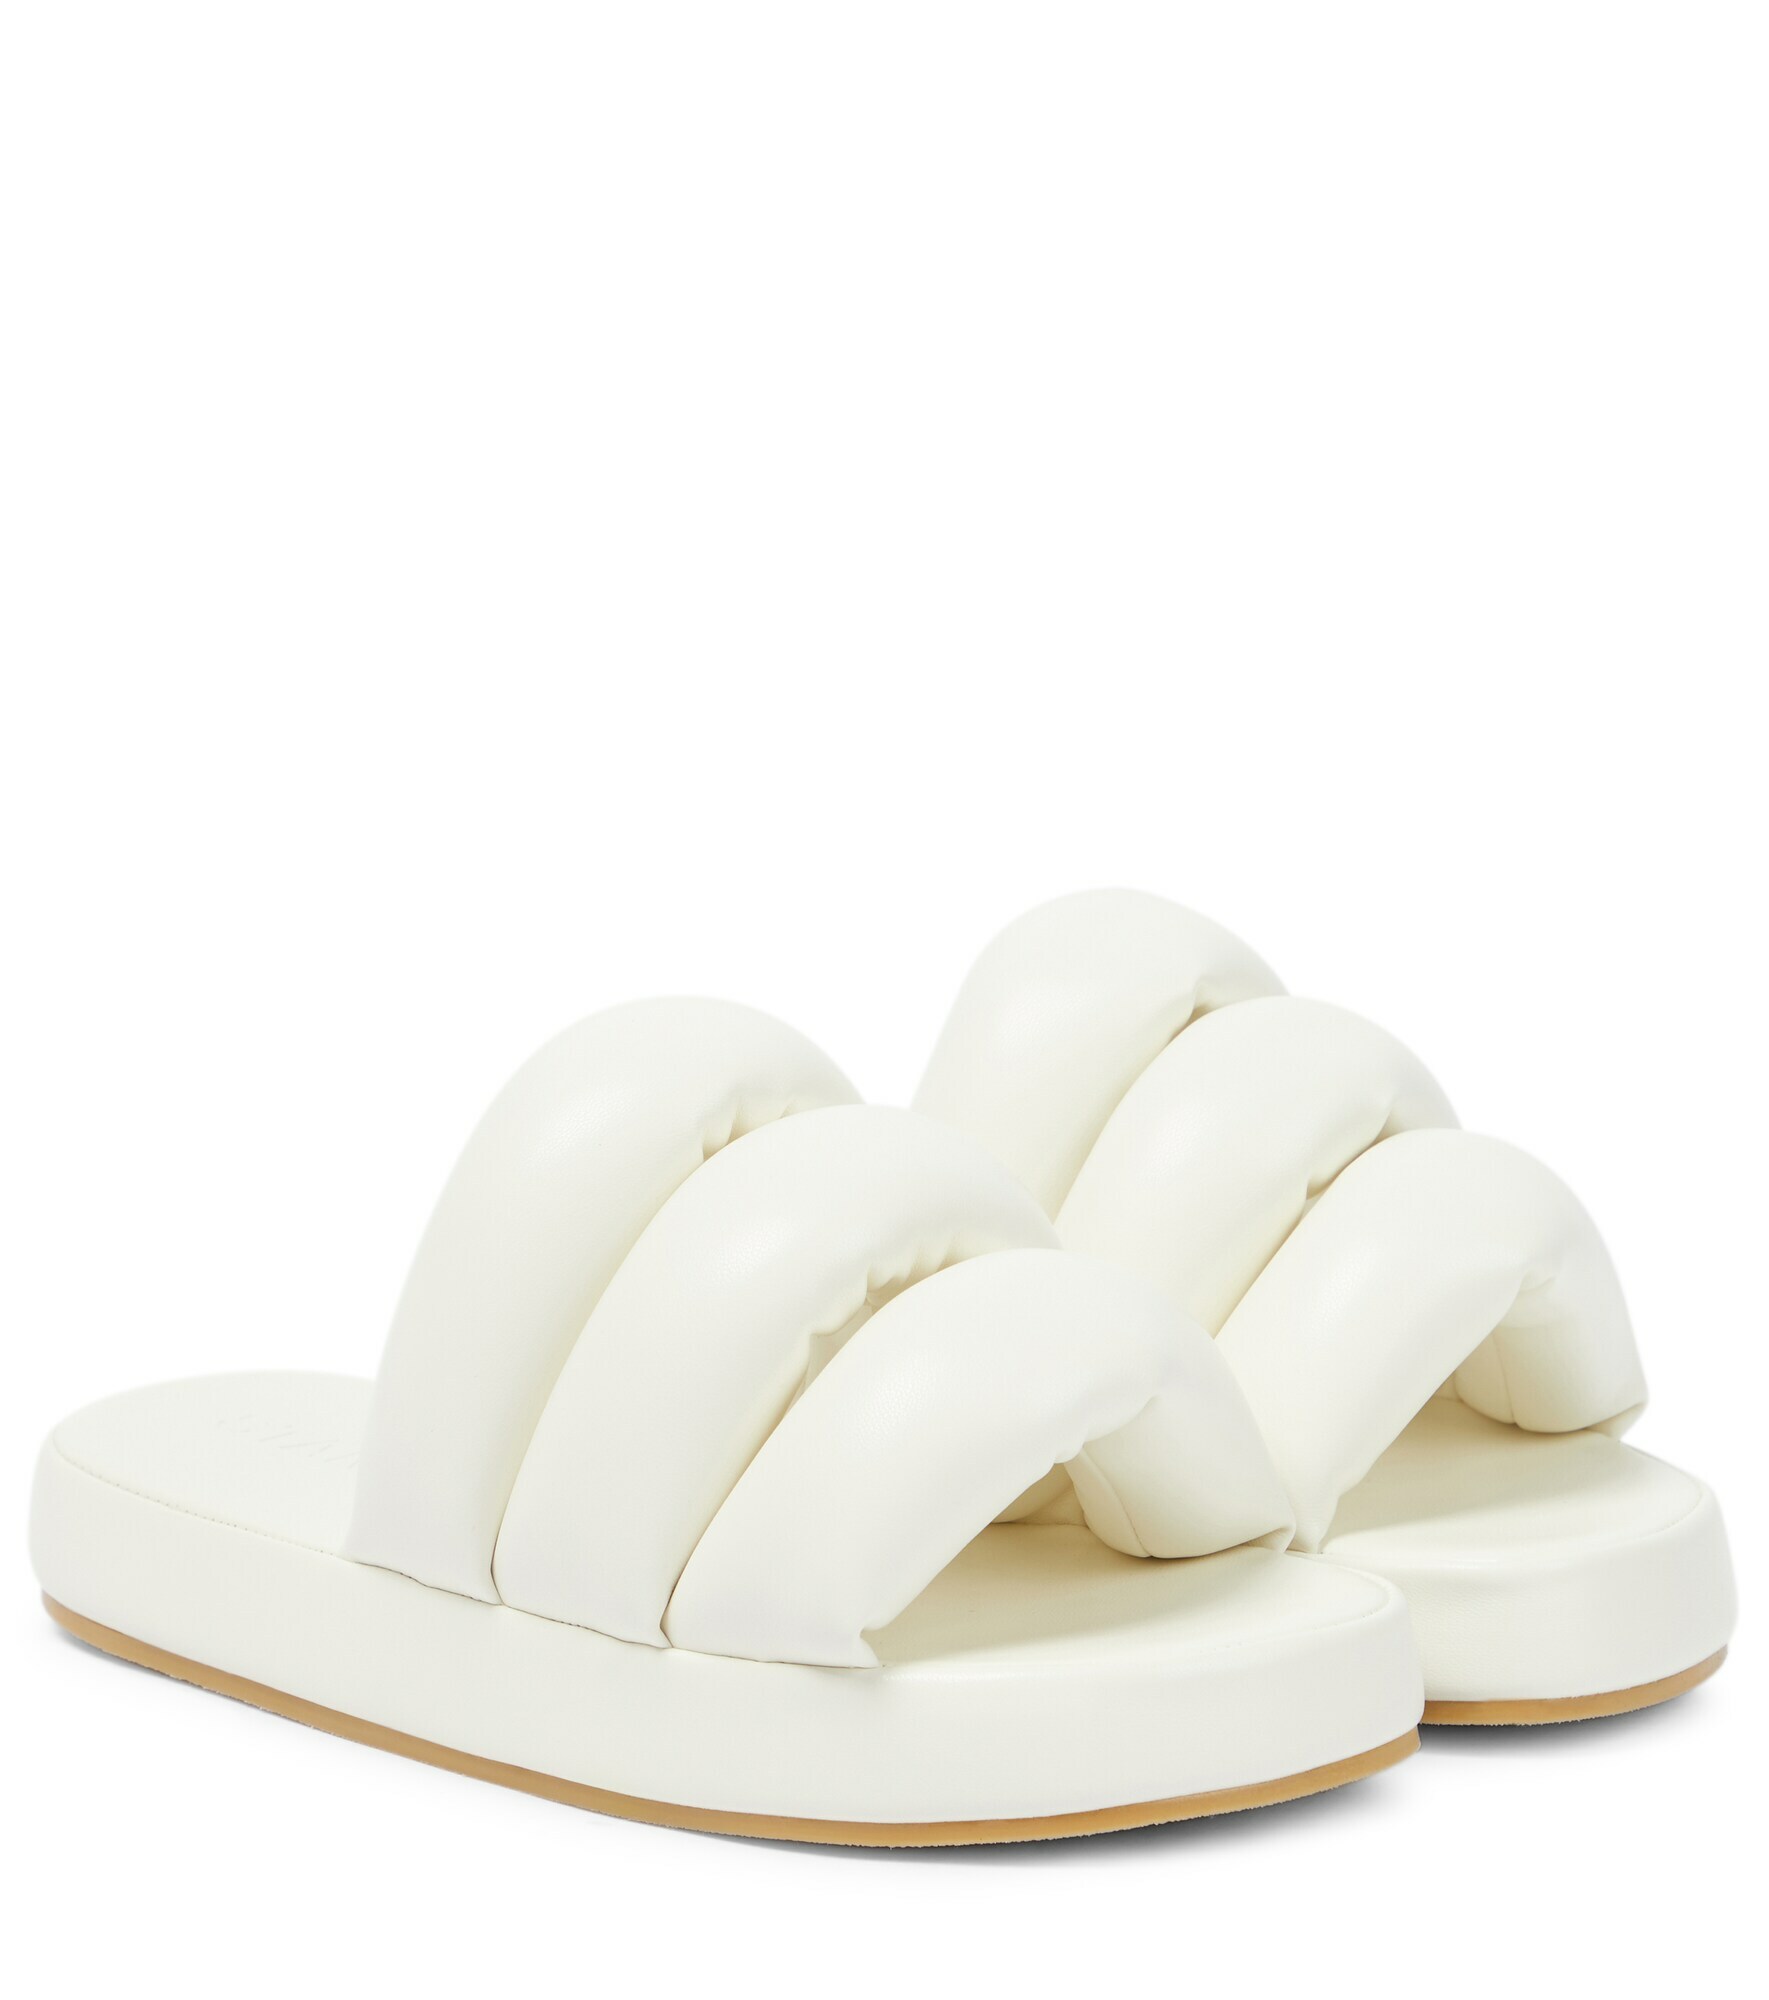 Stand Studio - Keira flat faux leather sandals Stand Studio